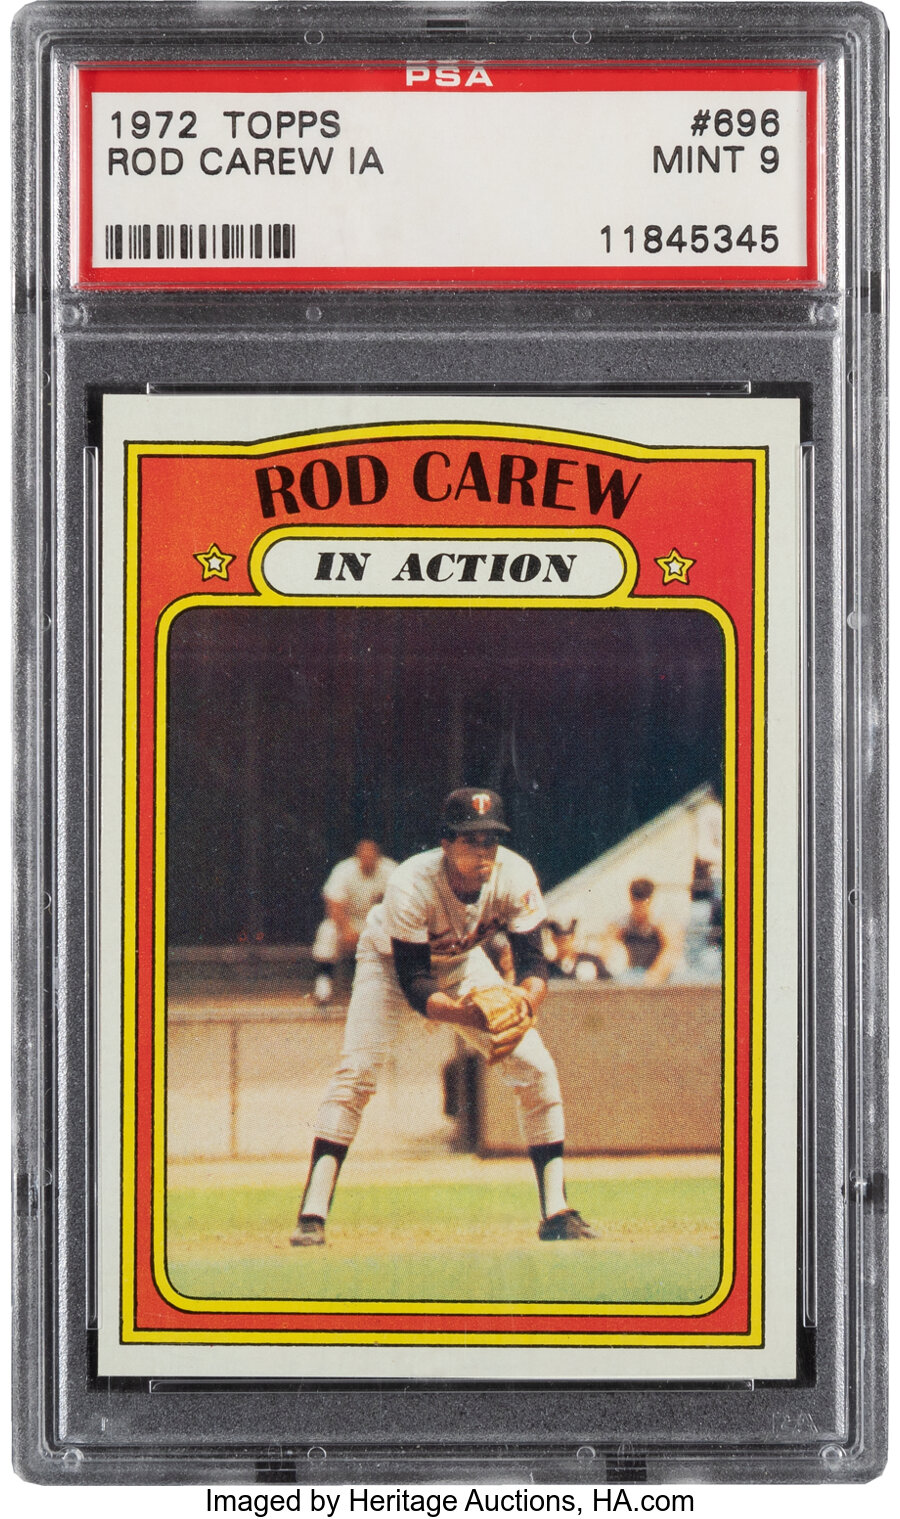 1972 Topps Rod Carew (In Action) #696 PSA Mint 9- Only One Higher